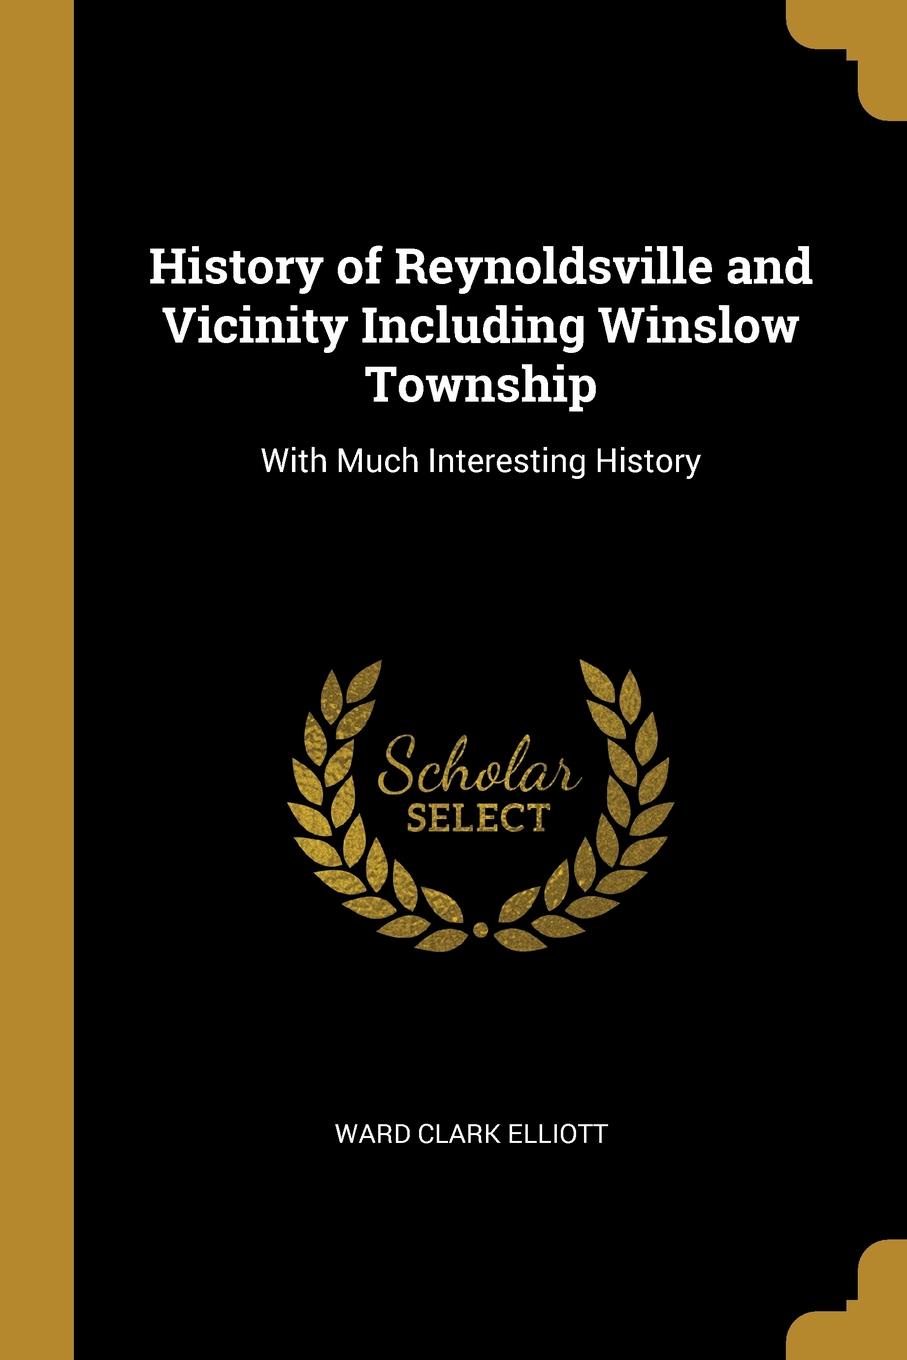 History of Reynoldsville and Vicinity Including Winslow Township. With Much Interesting History